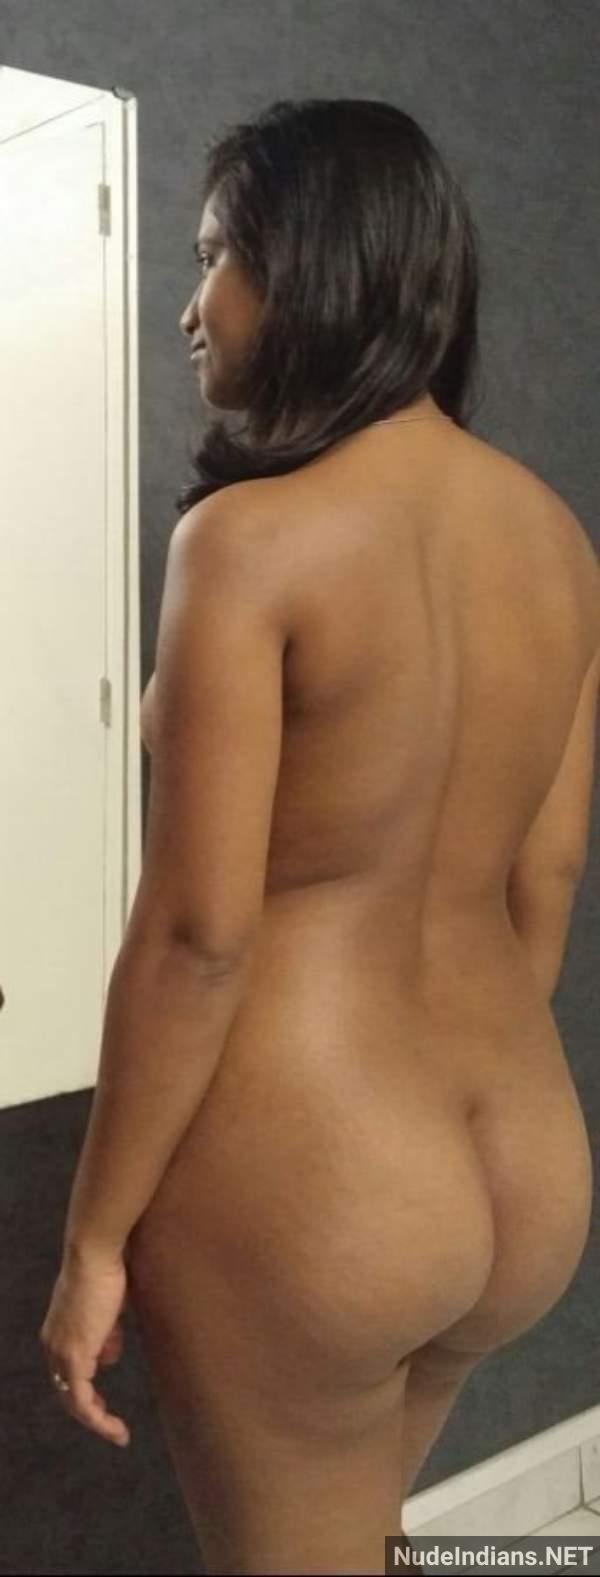 nude indian babes sexy selfies - 35